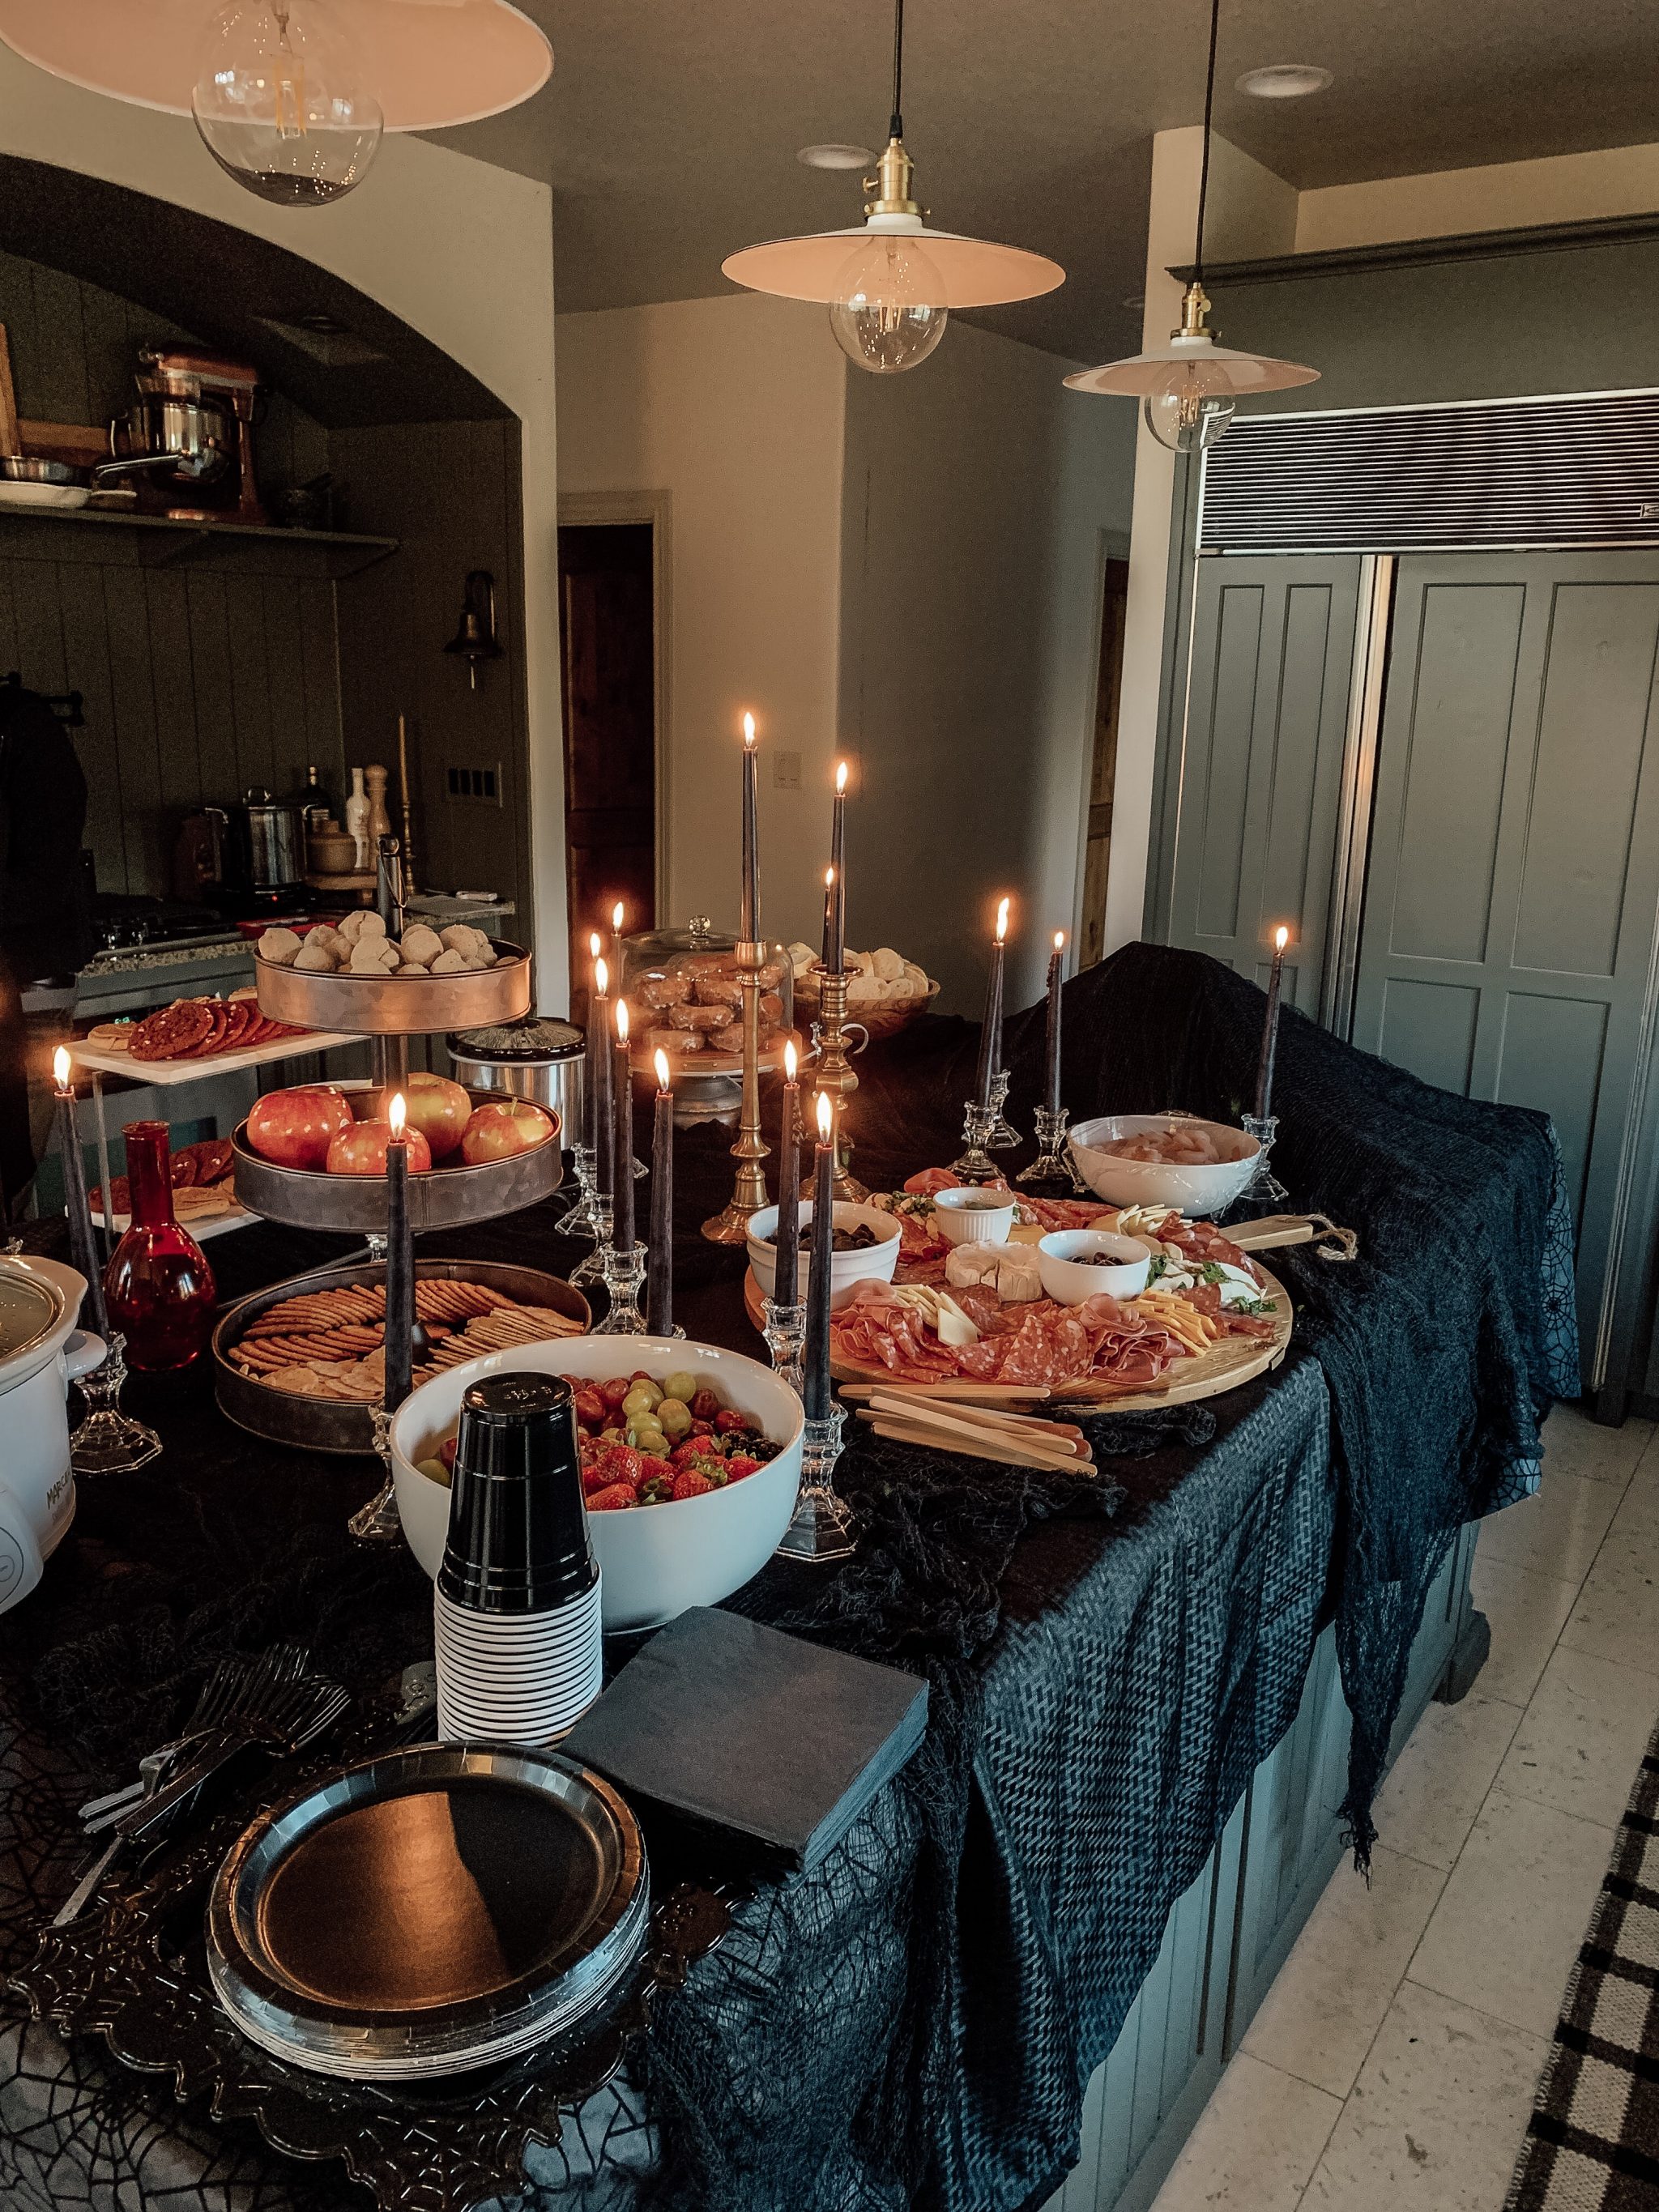 Halloween Murder Mystery Dinner Party w/ Carter Cooks — AT THE LANE